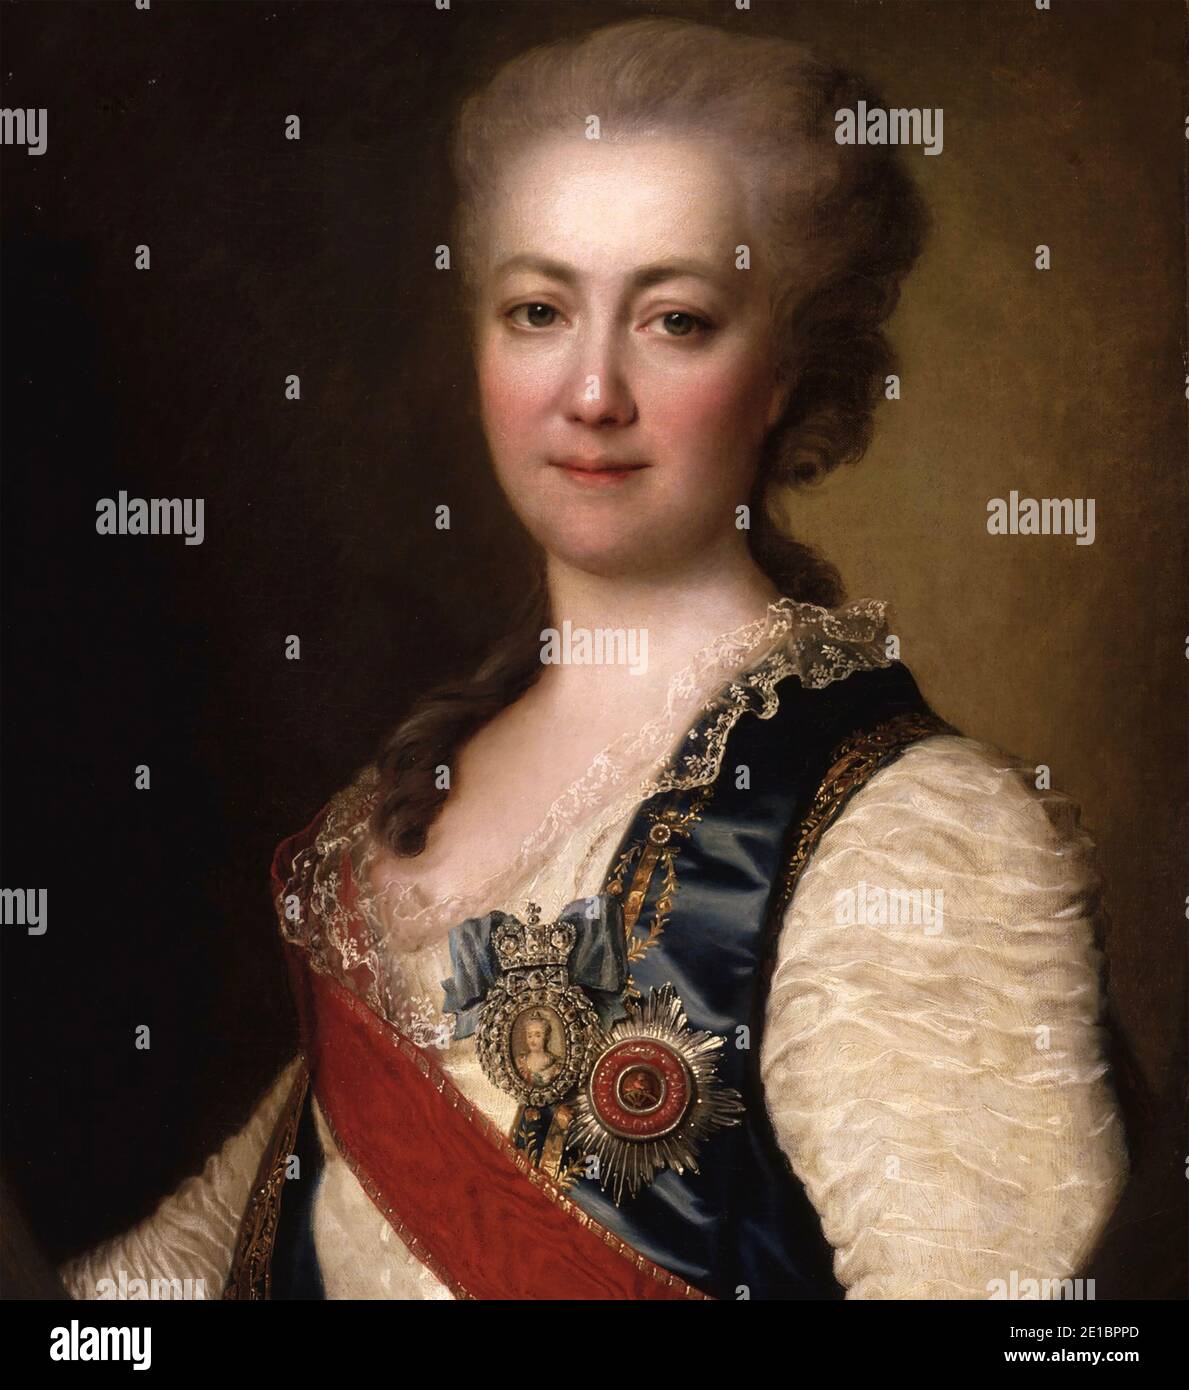 YEKATERINA VORONTSOVA-DASHKOVA (1743-1810) Russian confidante of Catherine the Great and a major figure in the Russian Enlightenment. A 1784 painting by Dmitry Levistky. Stock Photo